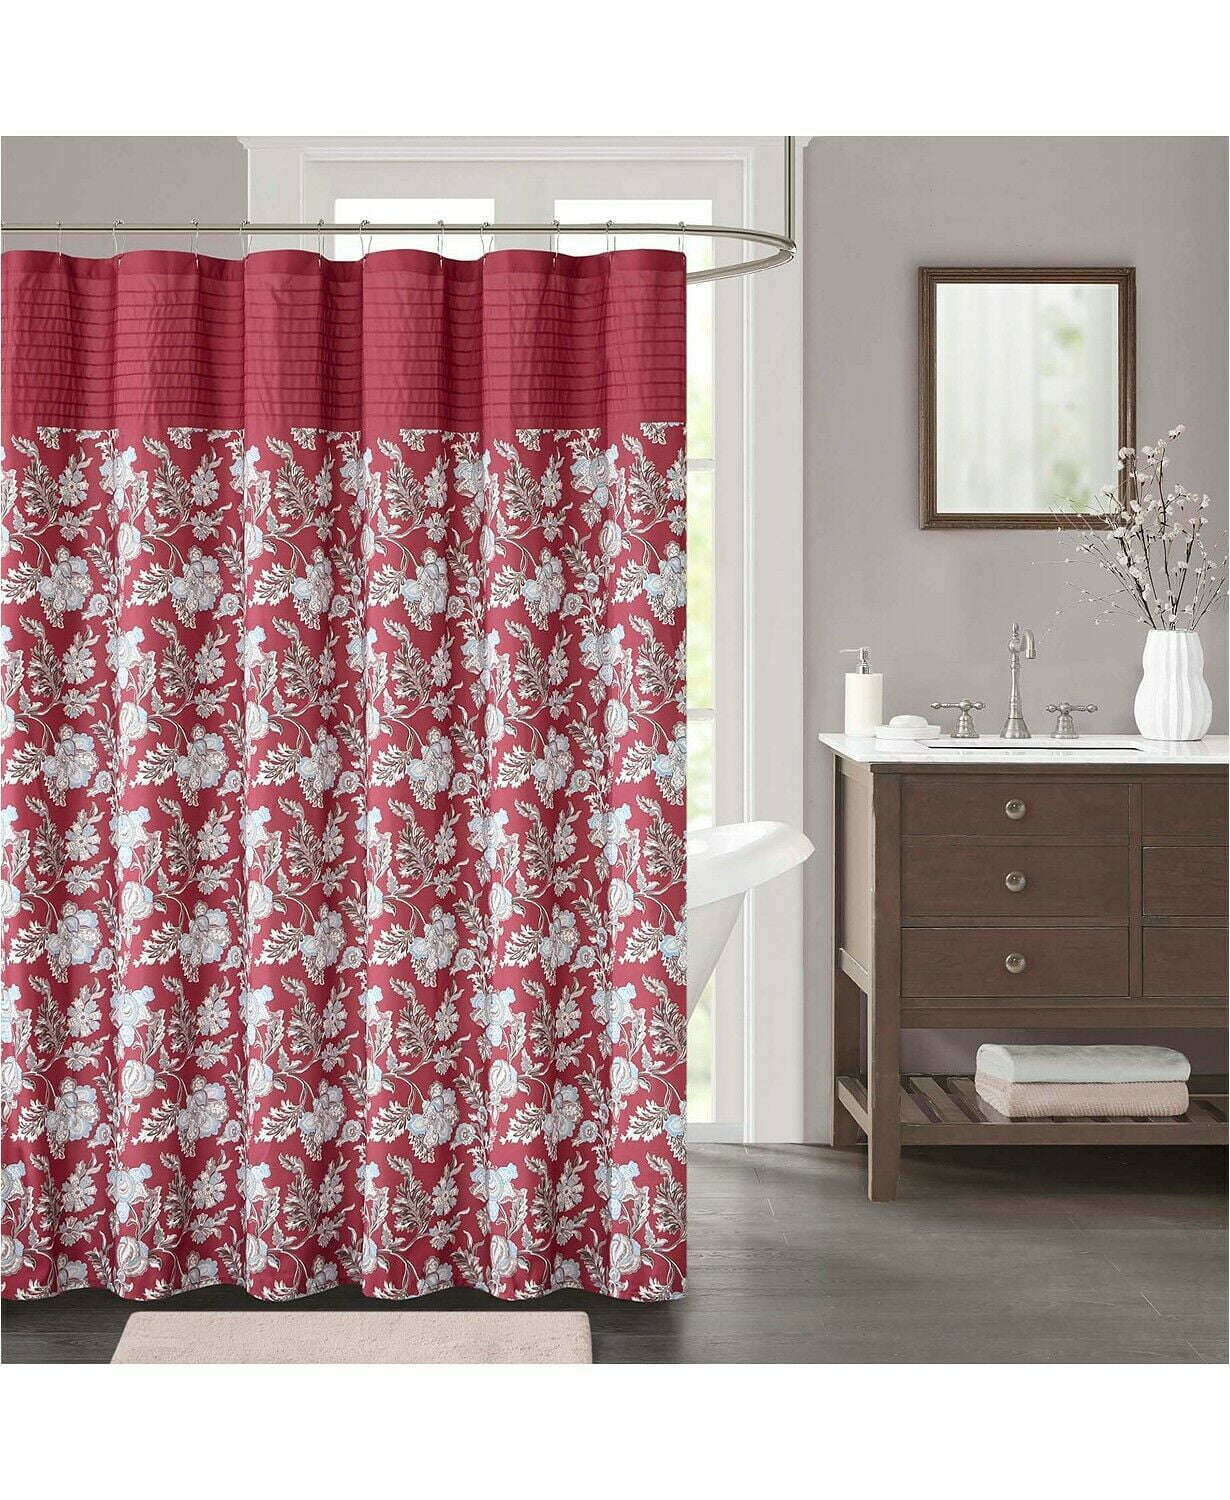 LINER INCLUDED SAVANNA Animal print  FAUX FUR FABRIC SHOWER CURTAIN 